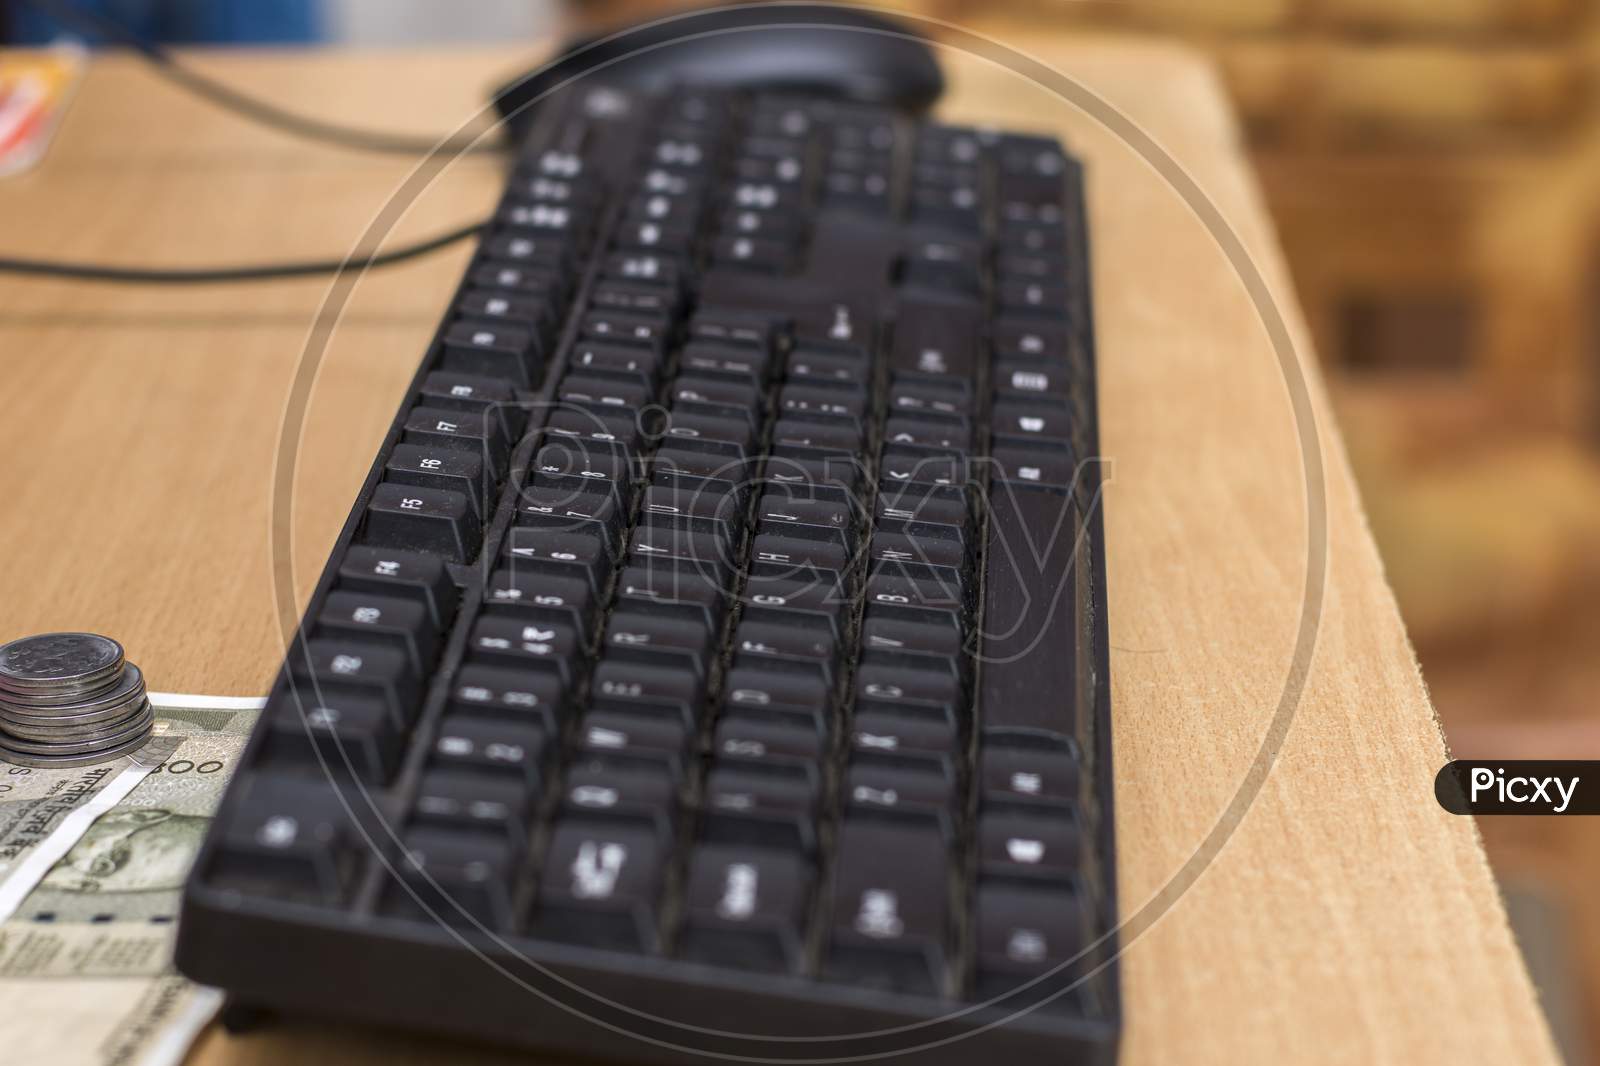 A Old Useful Black Keyboard With Mouse